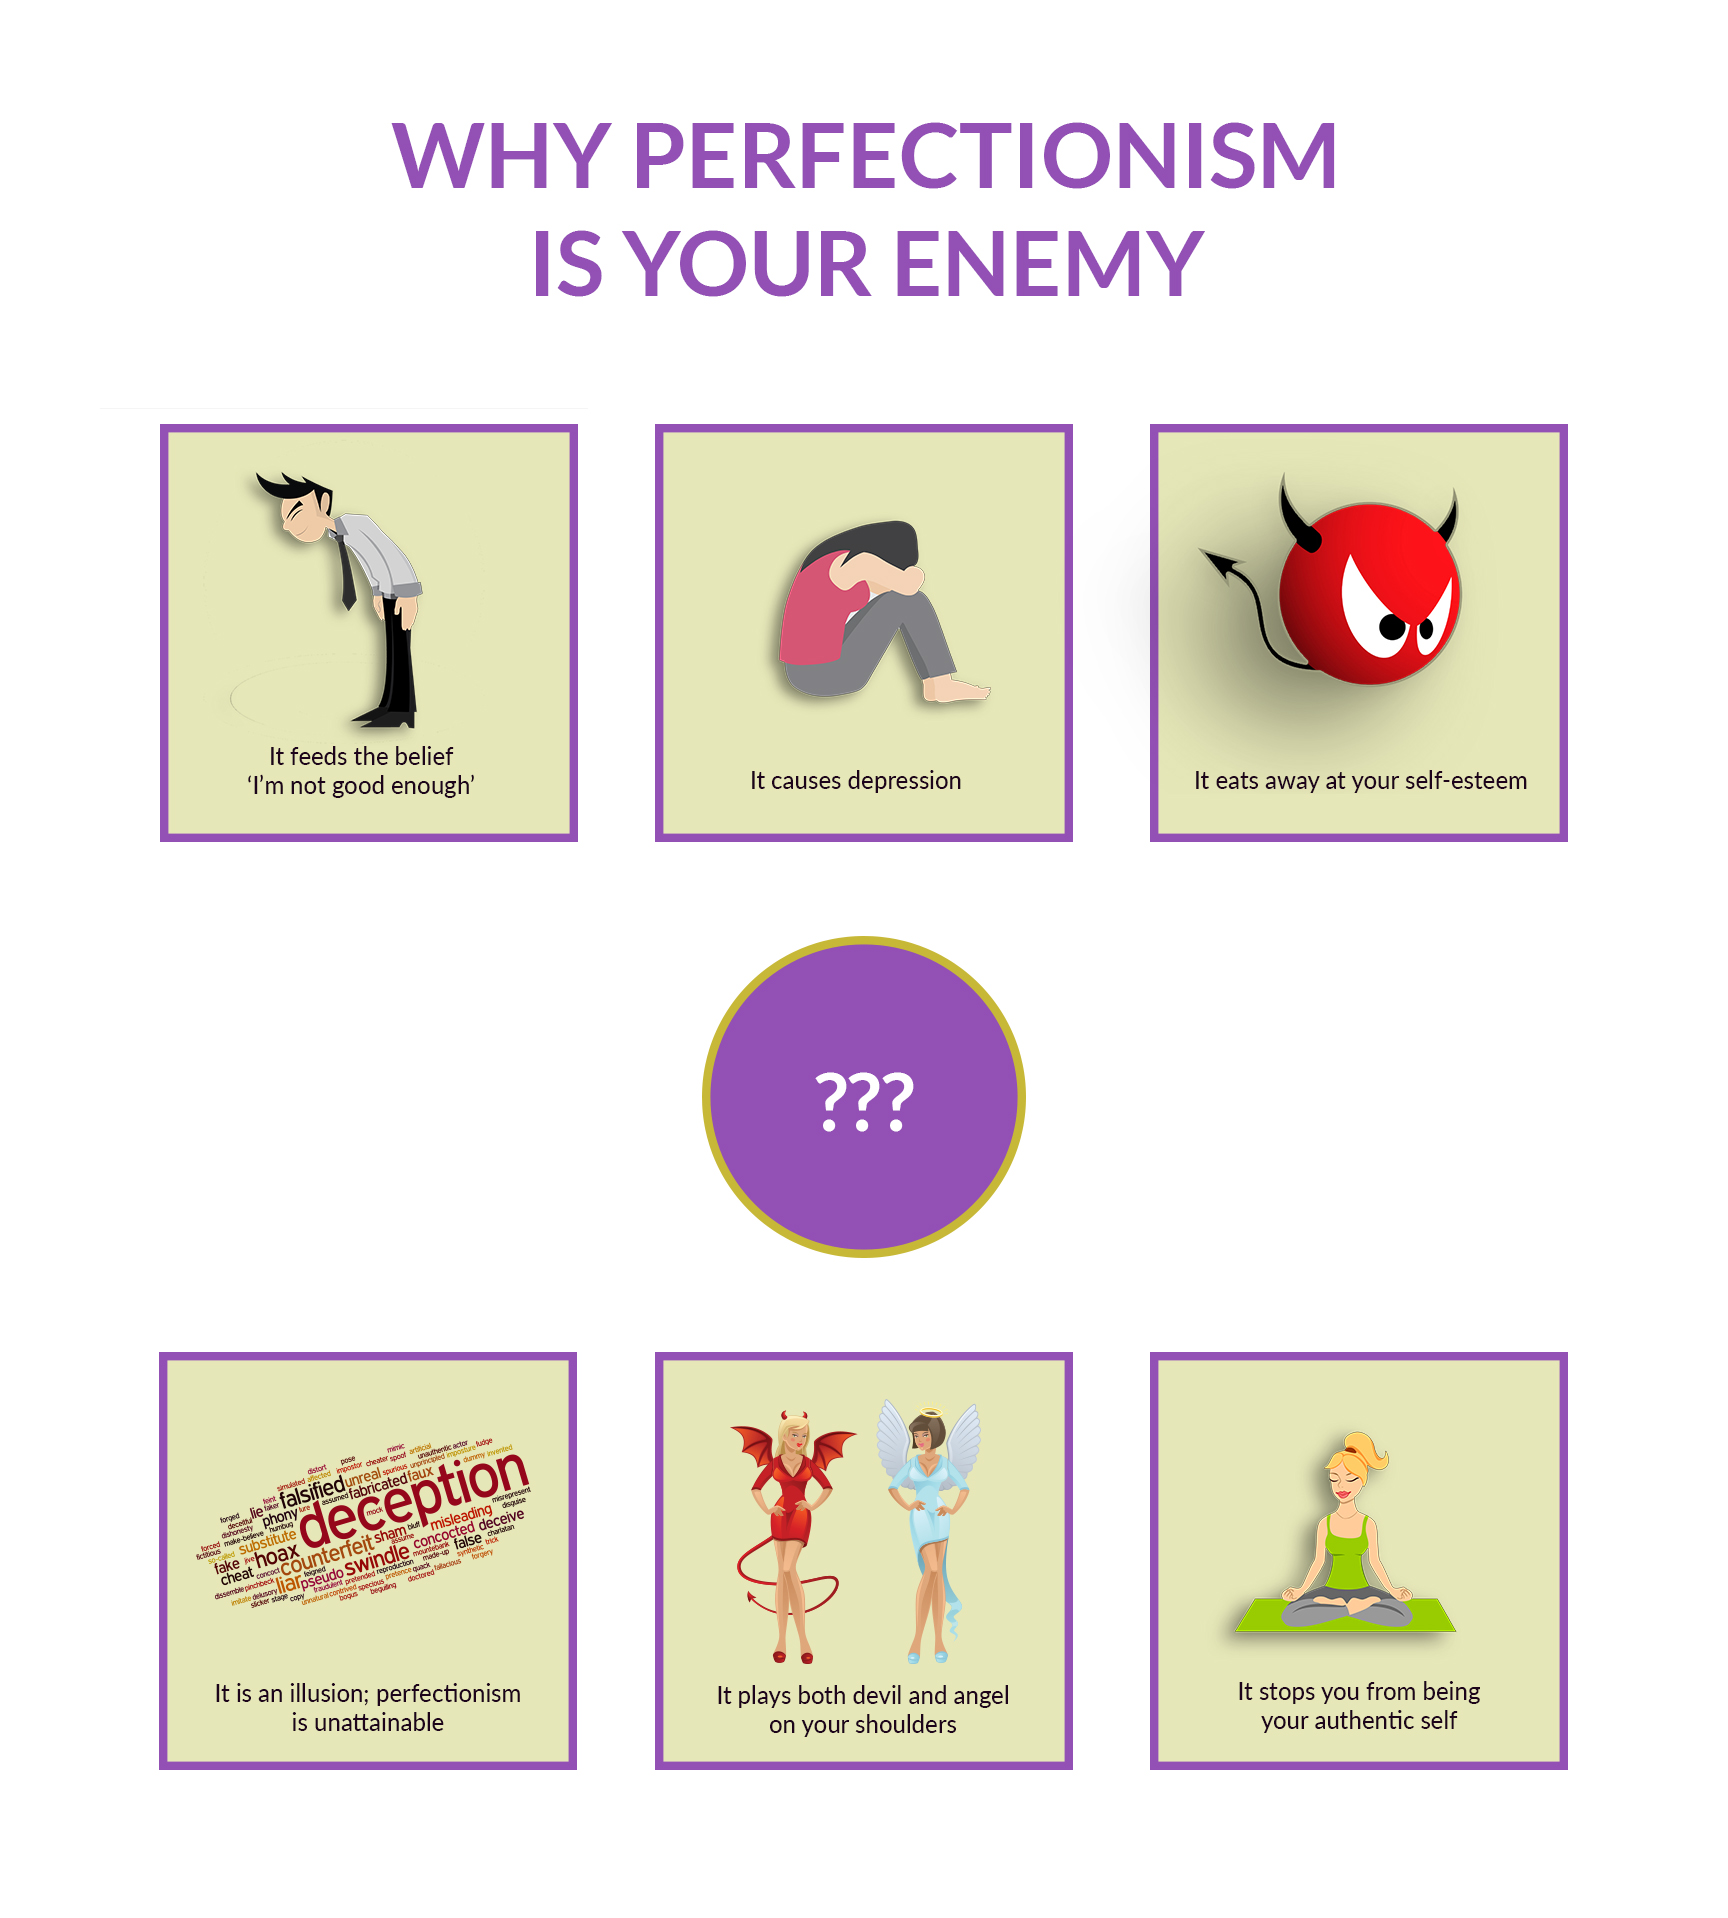 The down side of perfectionism